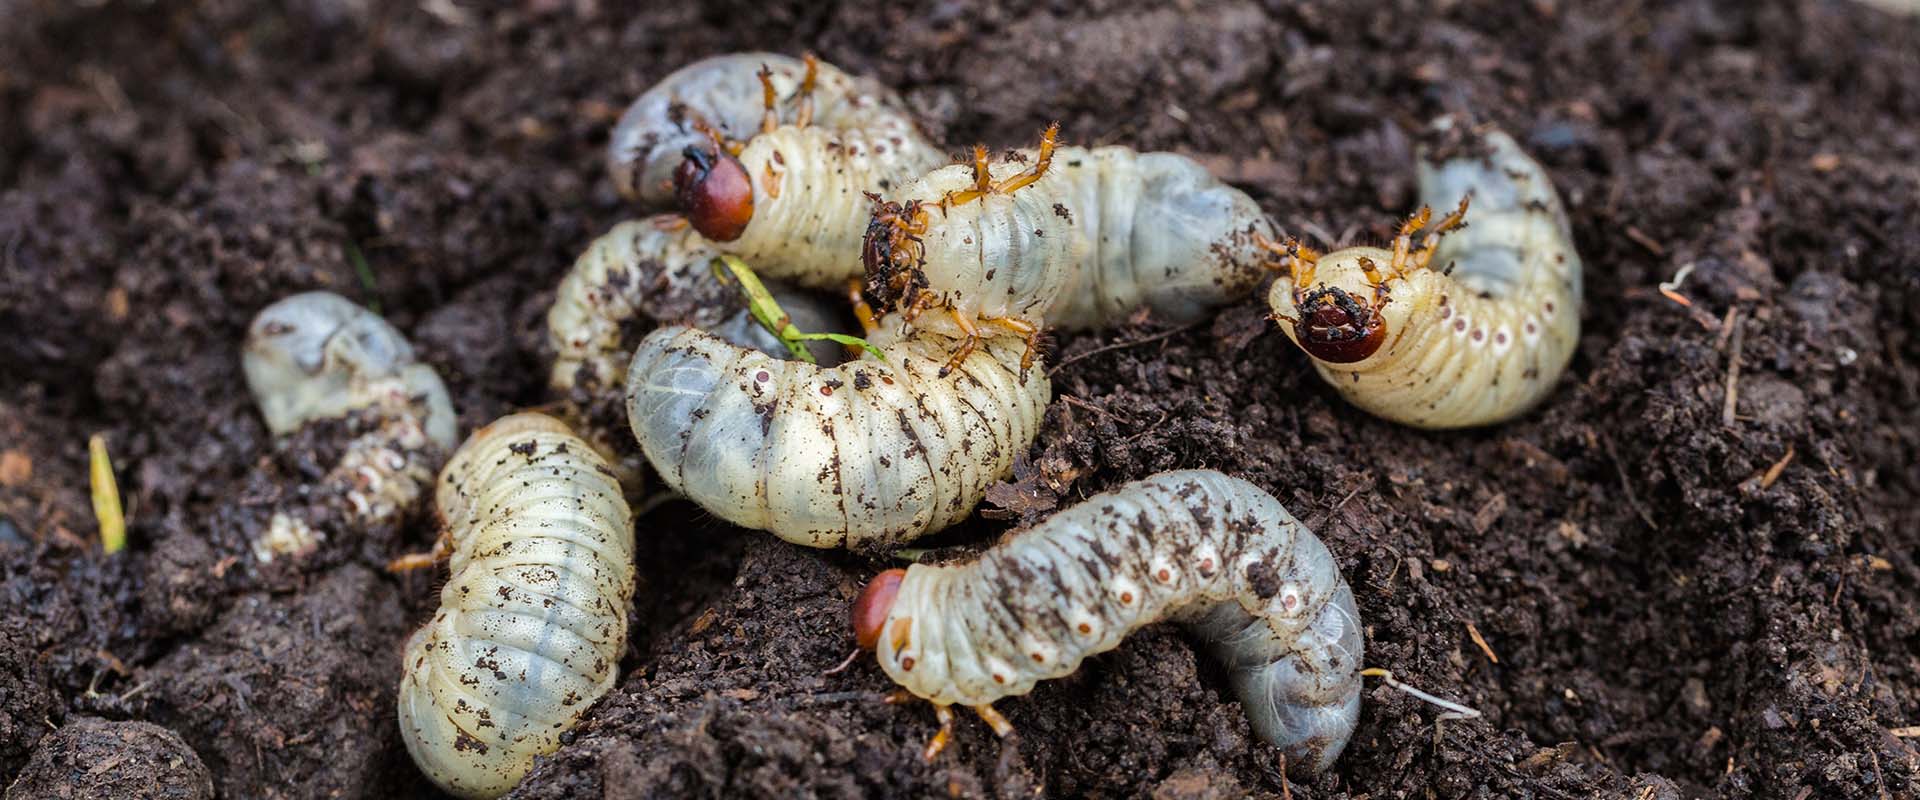 How to treat grubs in your lawn